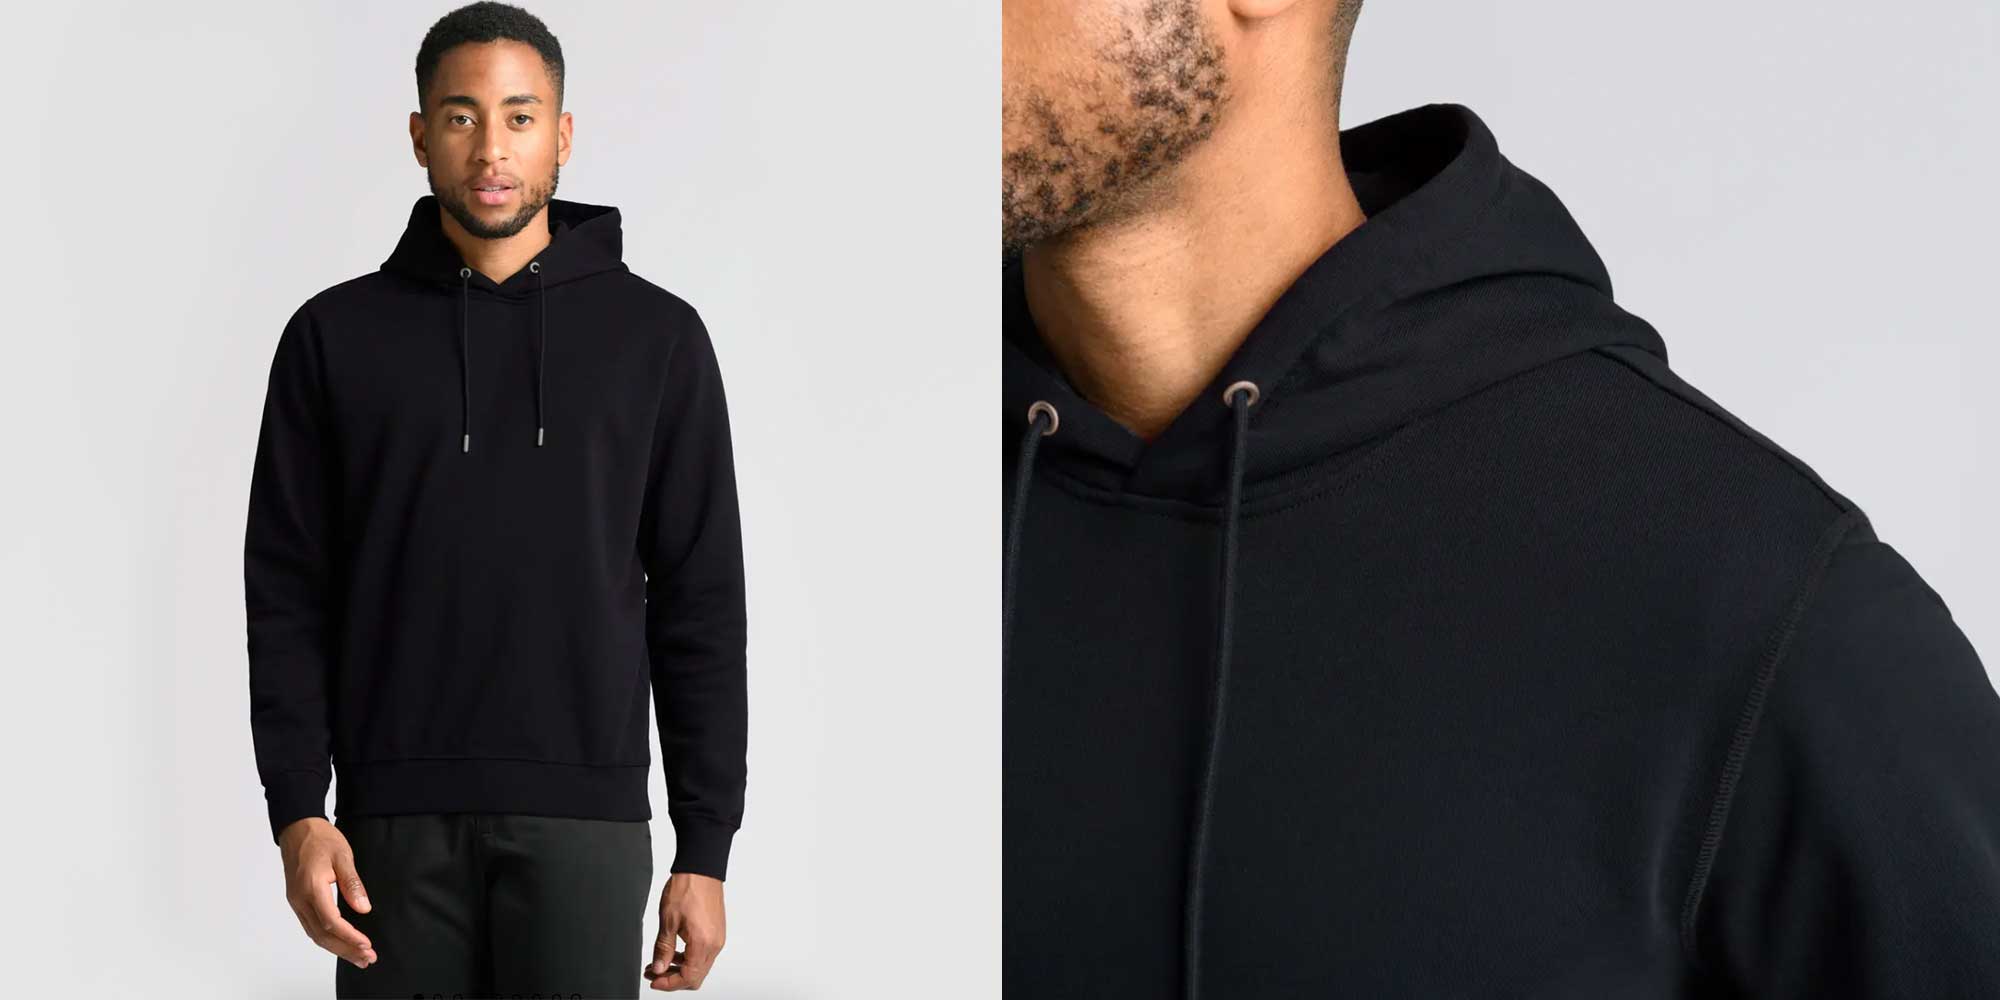 Relax in These 29 Sustainable Sweatshirts and Sweatpants - Good On You